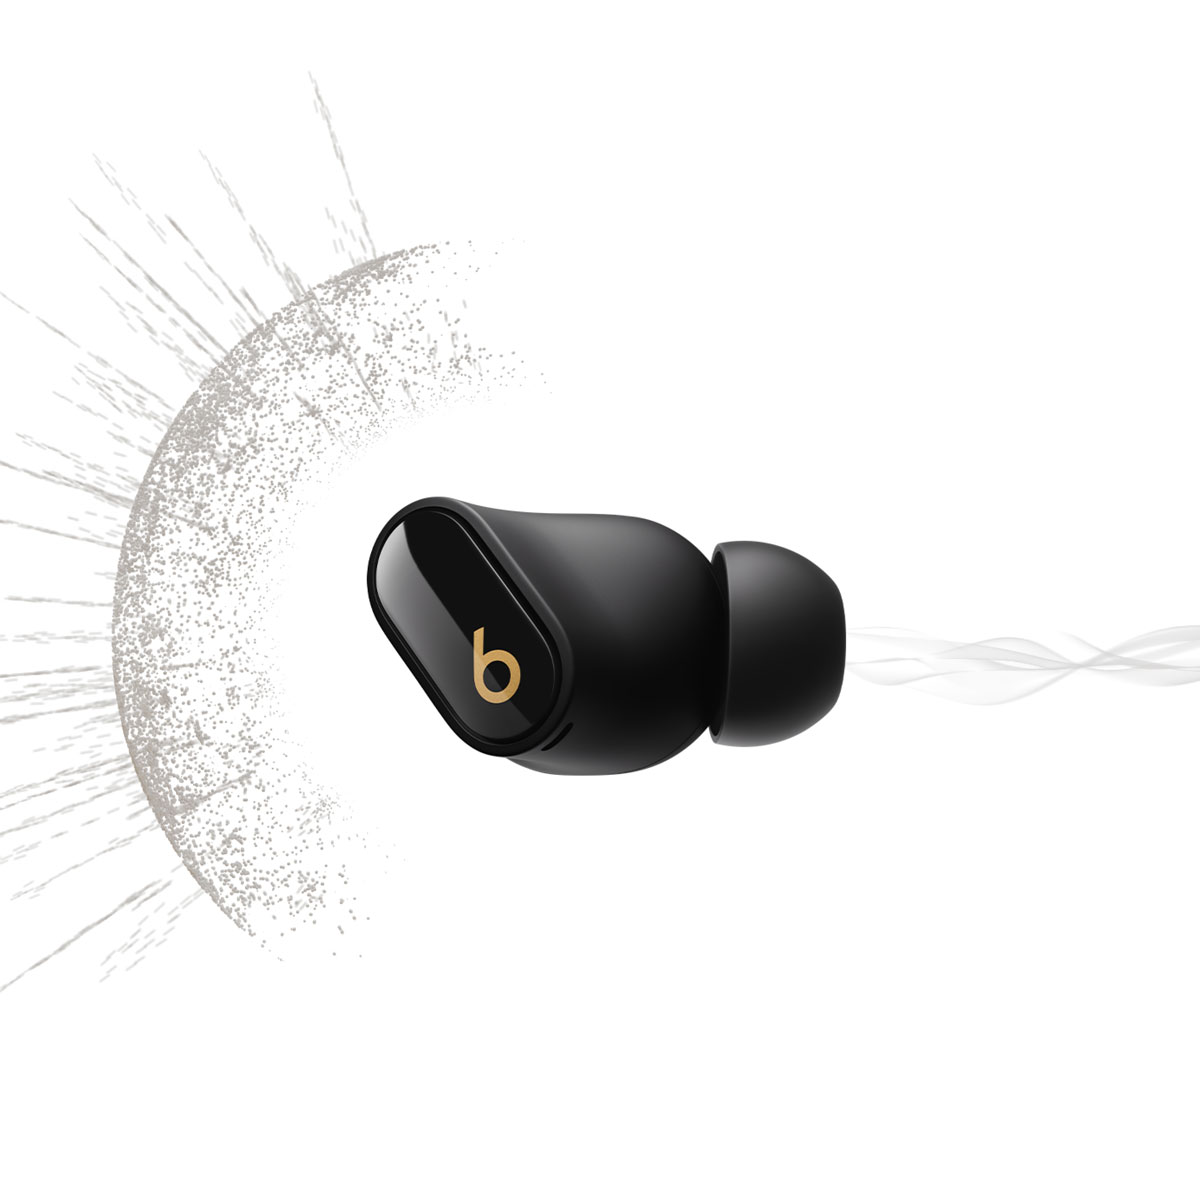 Beats Studio Buds + earbud demonstrating Active Noise Cancellation with sound wave graphics